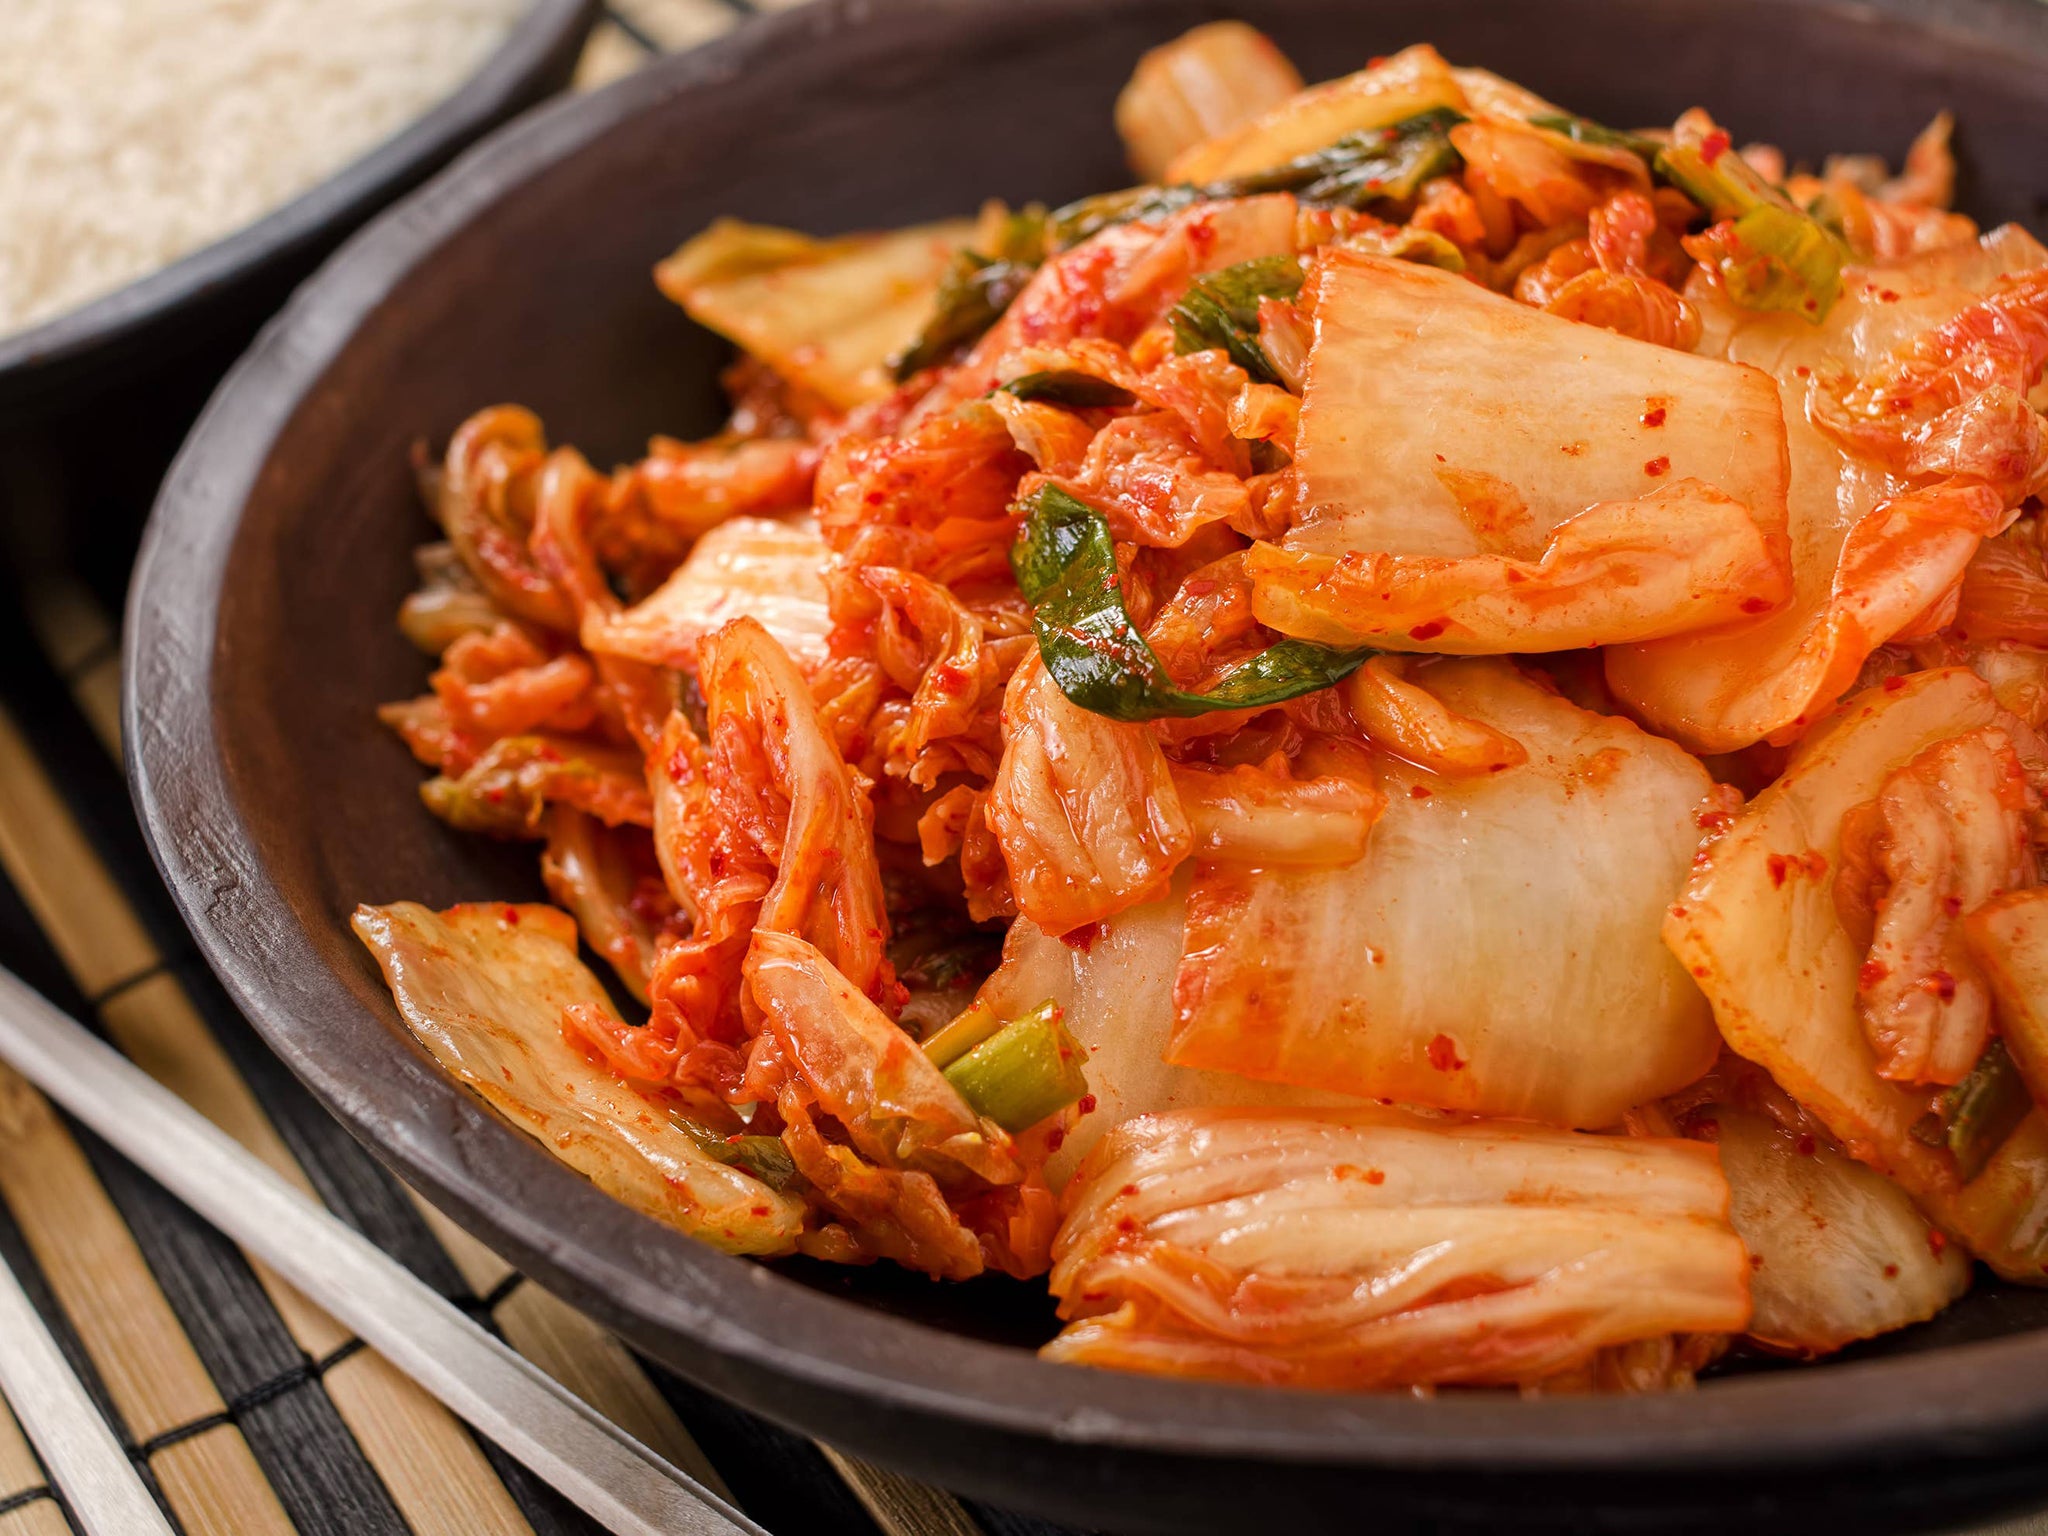 How to make your own kimchi